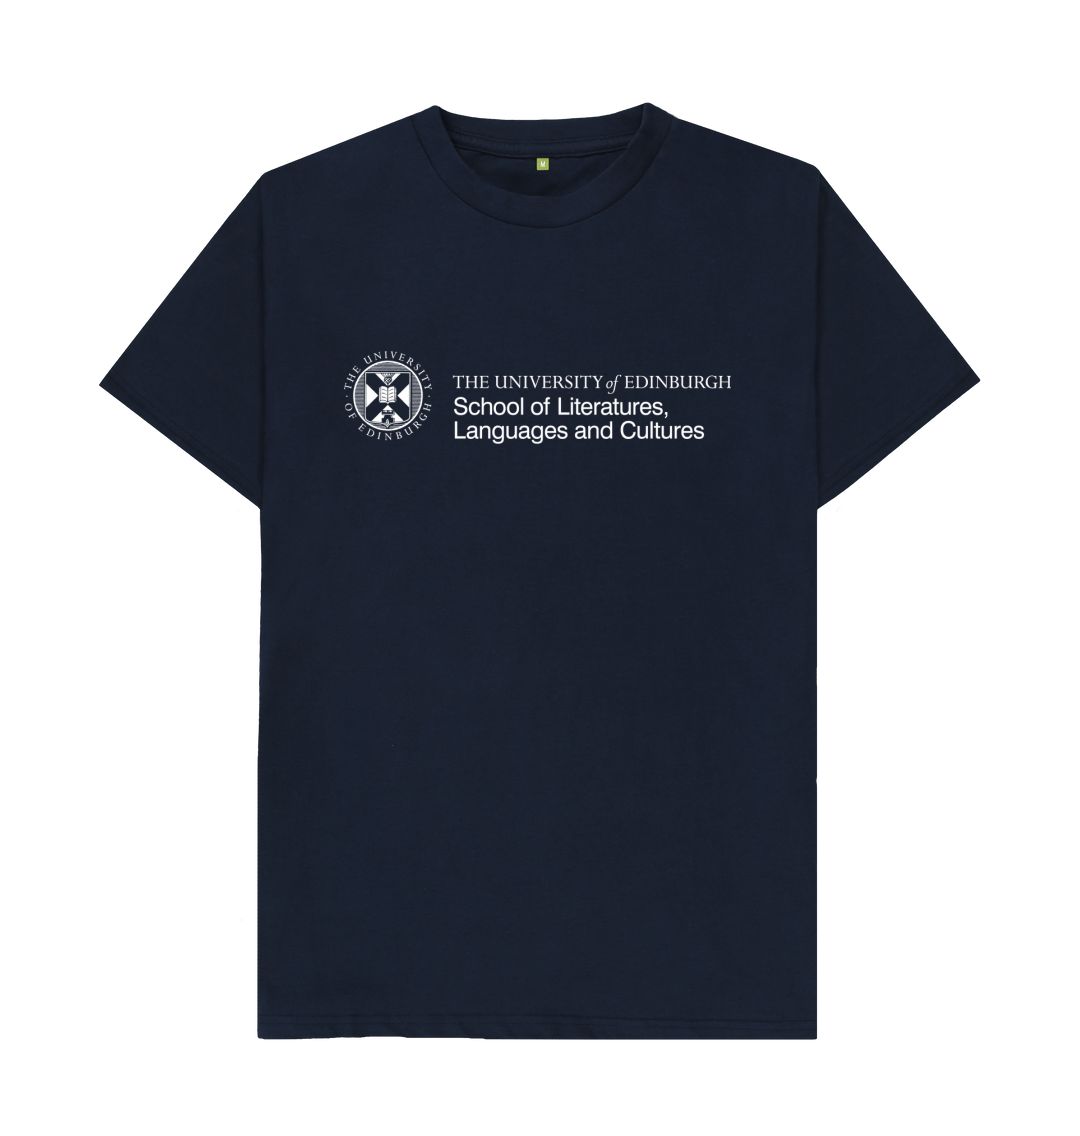 Navy T-Shirt with white University crest and text that reads ' University of Edinburgh School of Literatures, Languages and Cultures